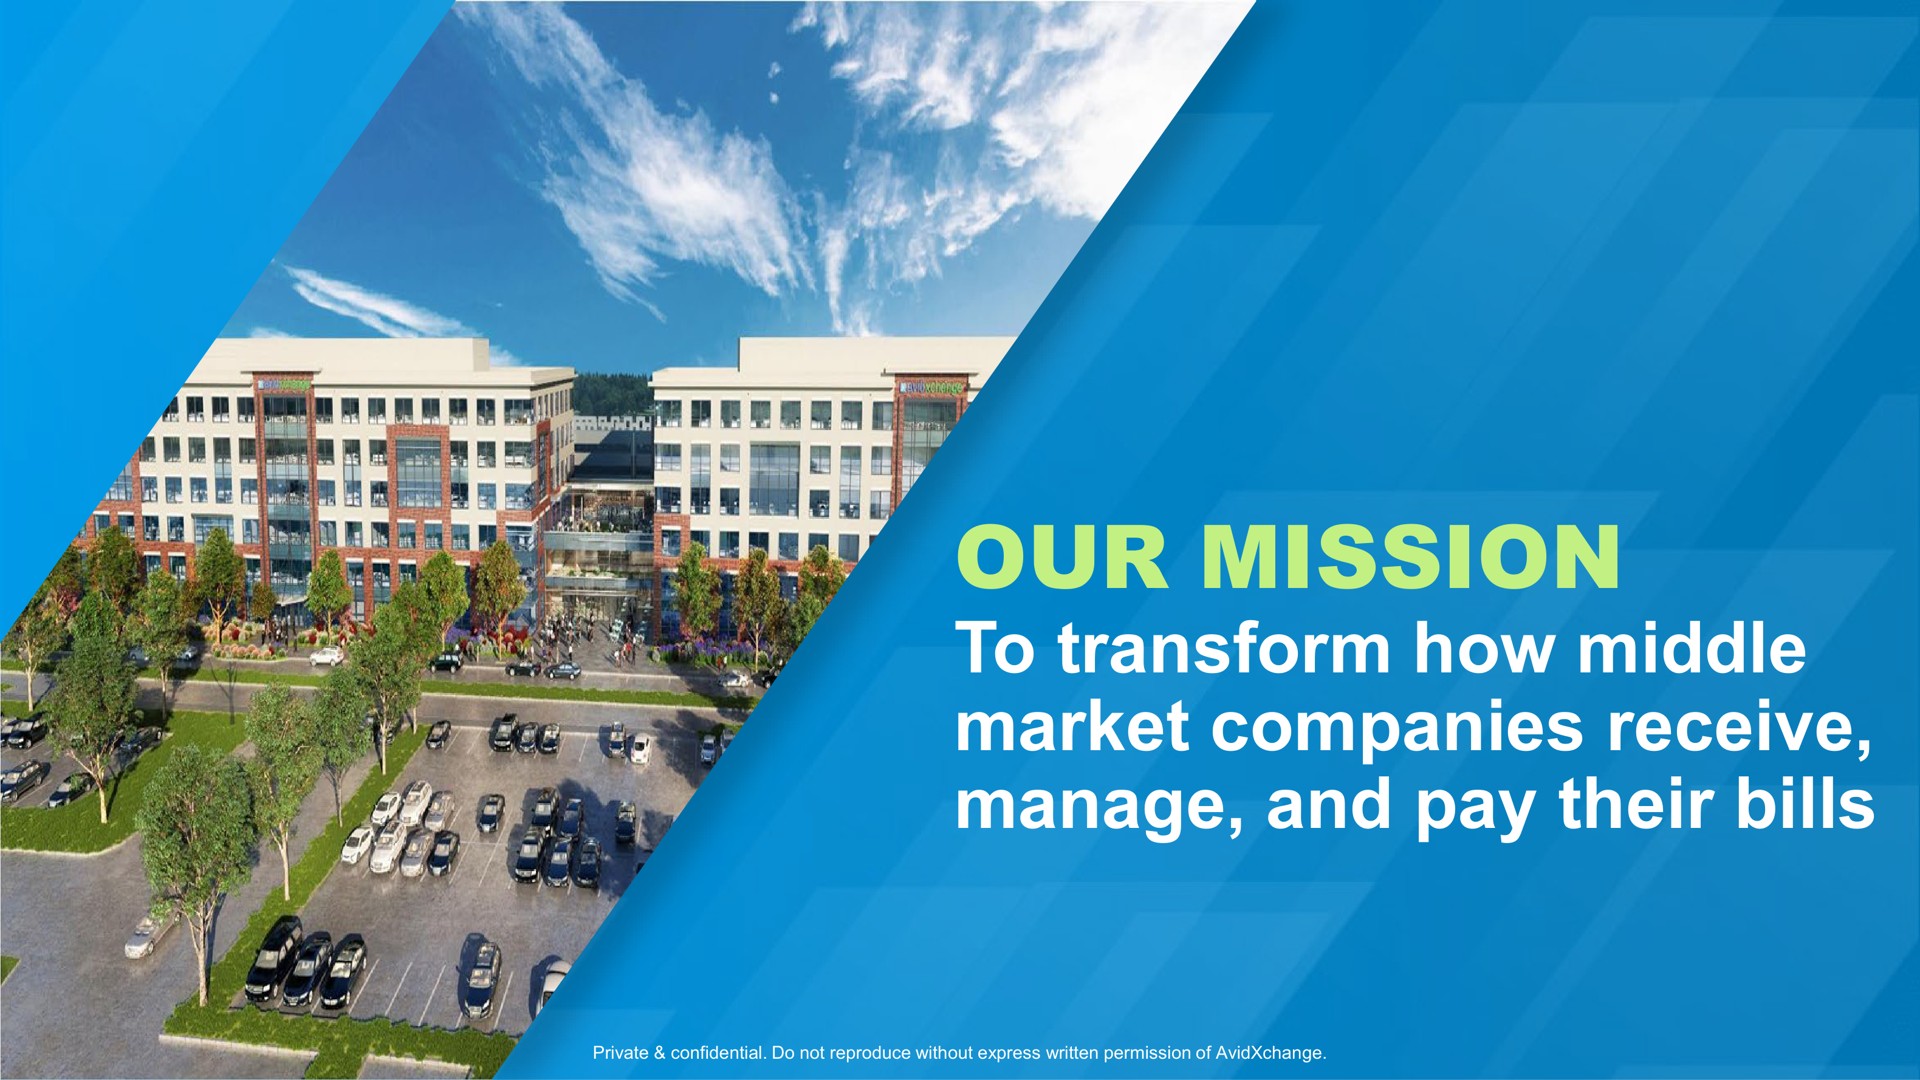 our mission to transform how middle market companies receive manage and pay their bills | AvidXchange